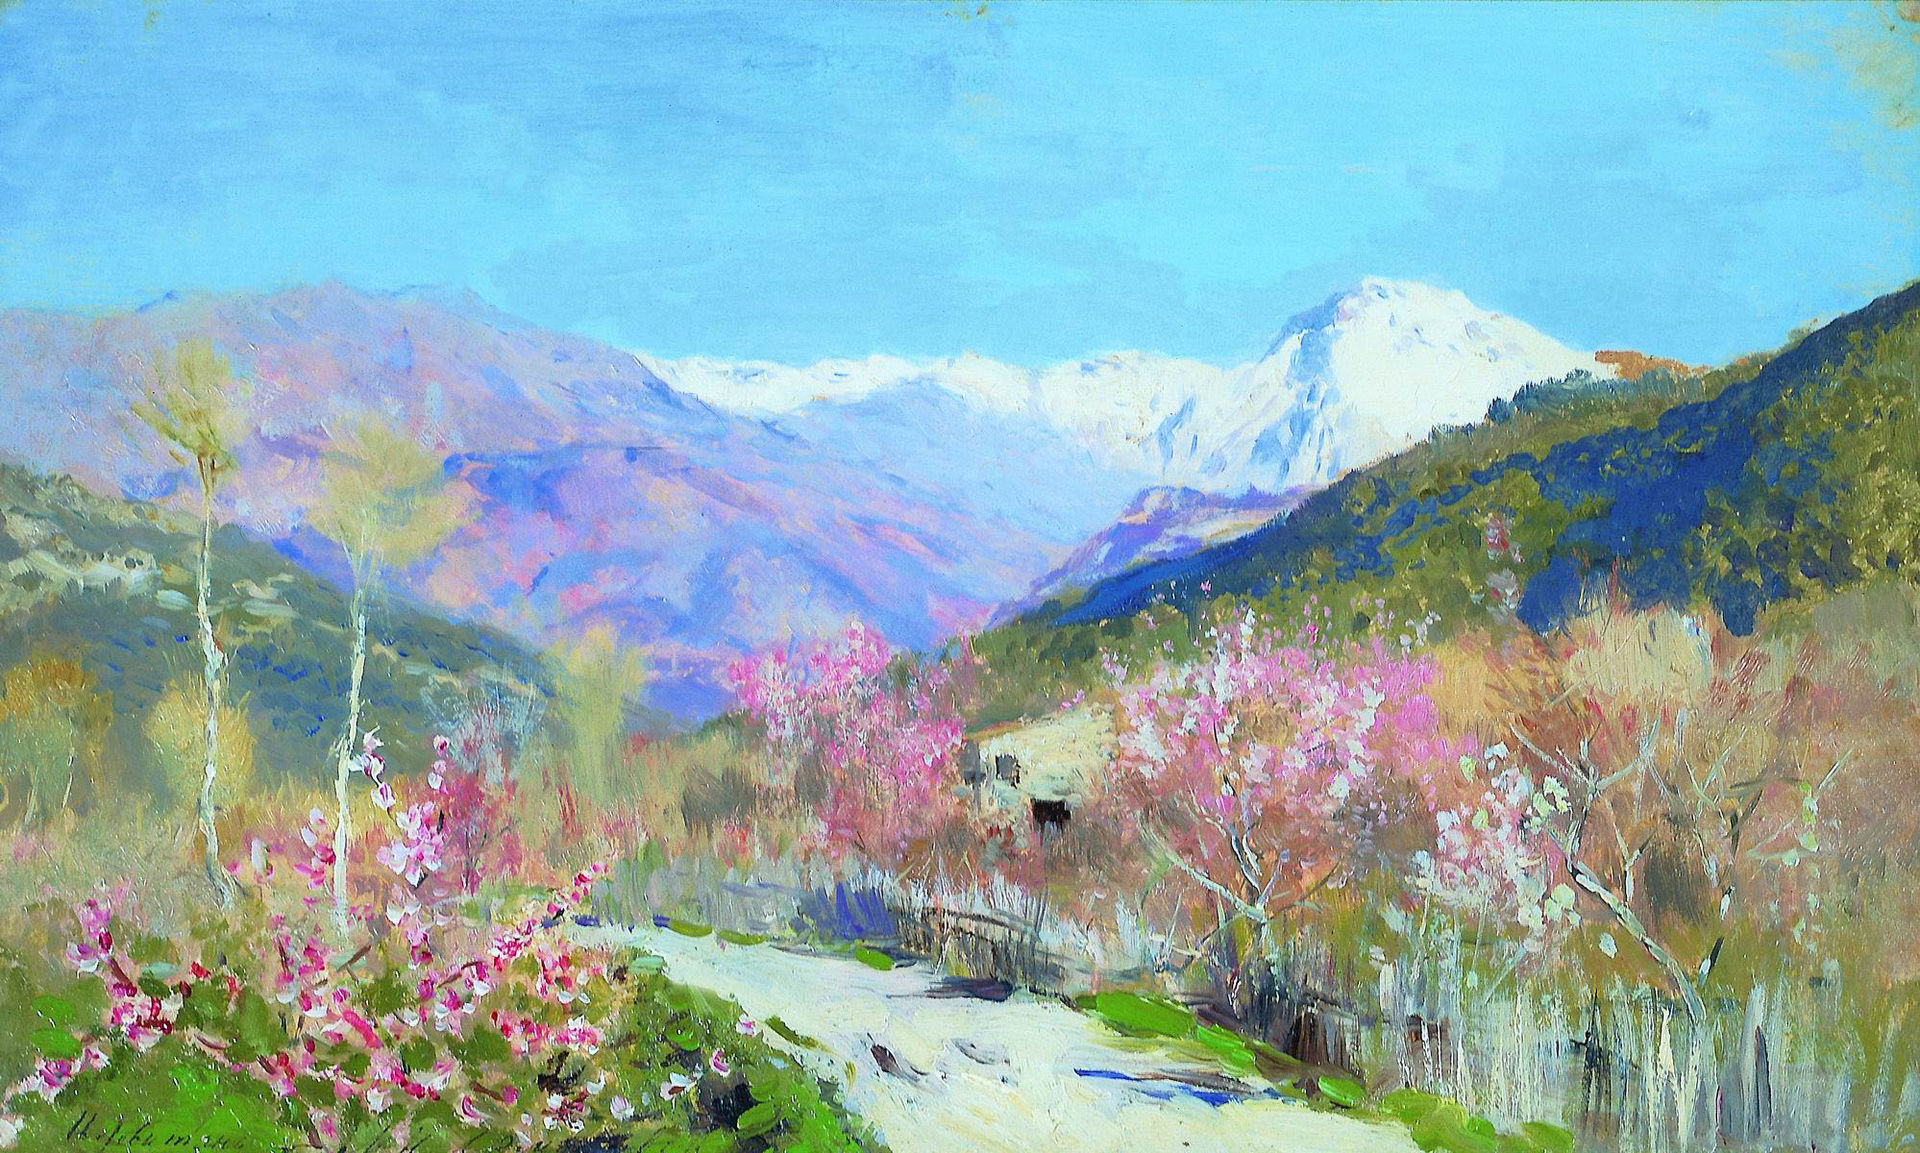 "Spring in Italy," by Isaac Levitan